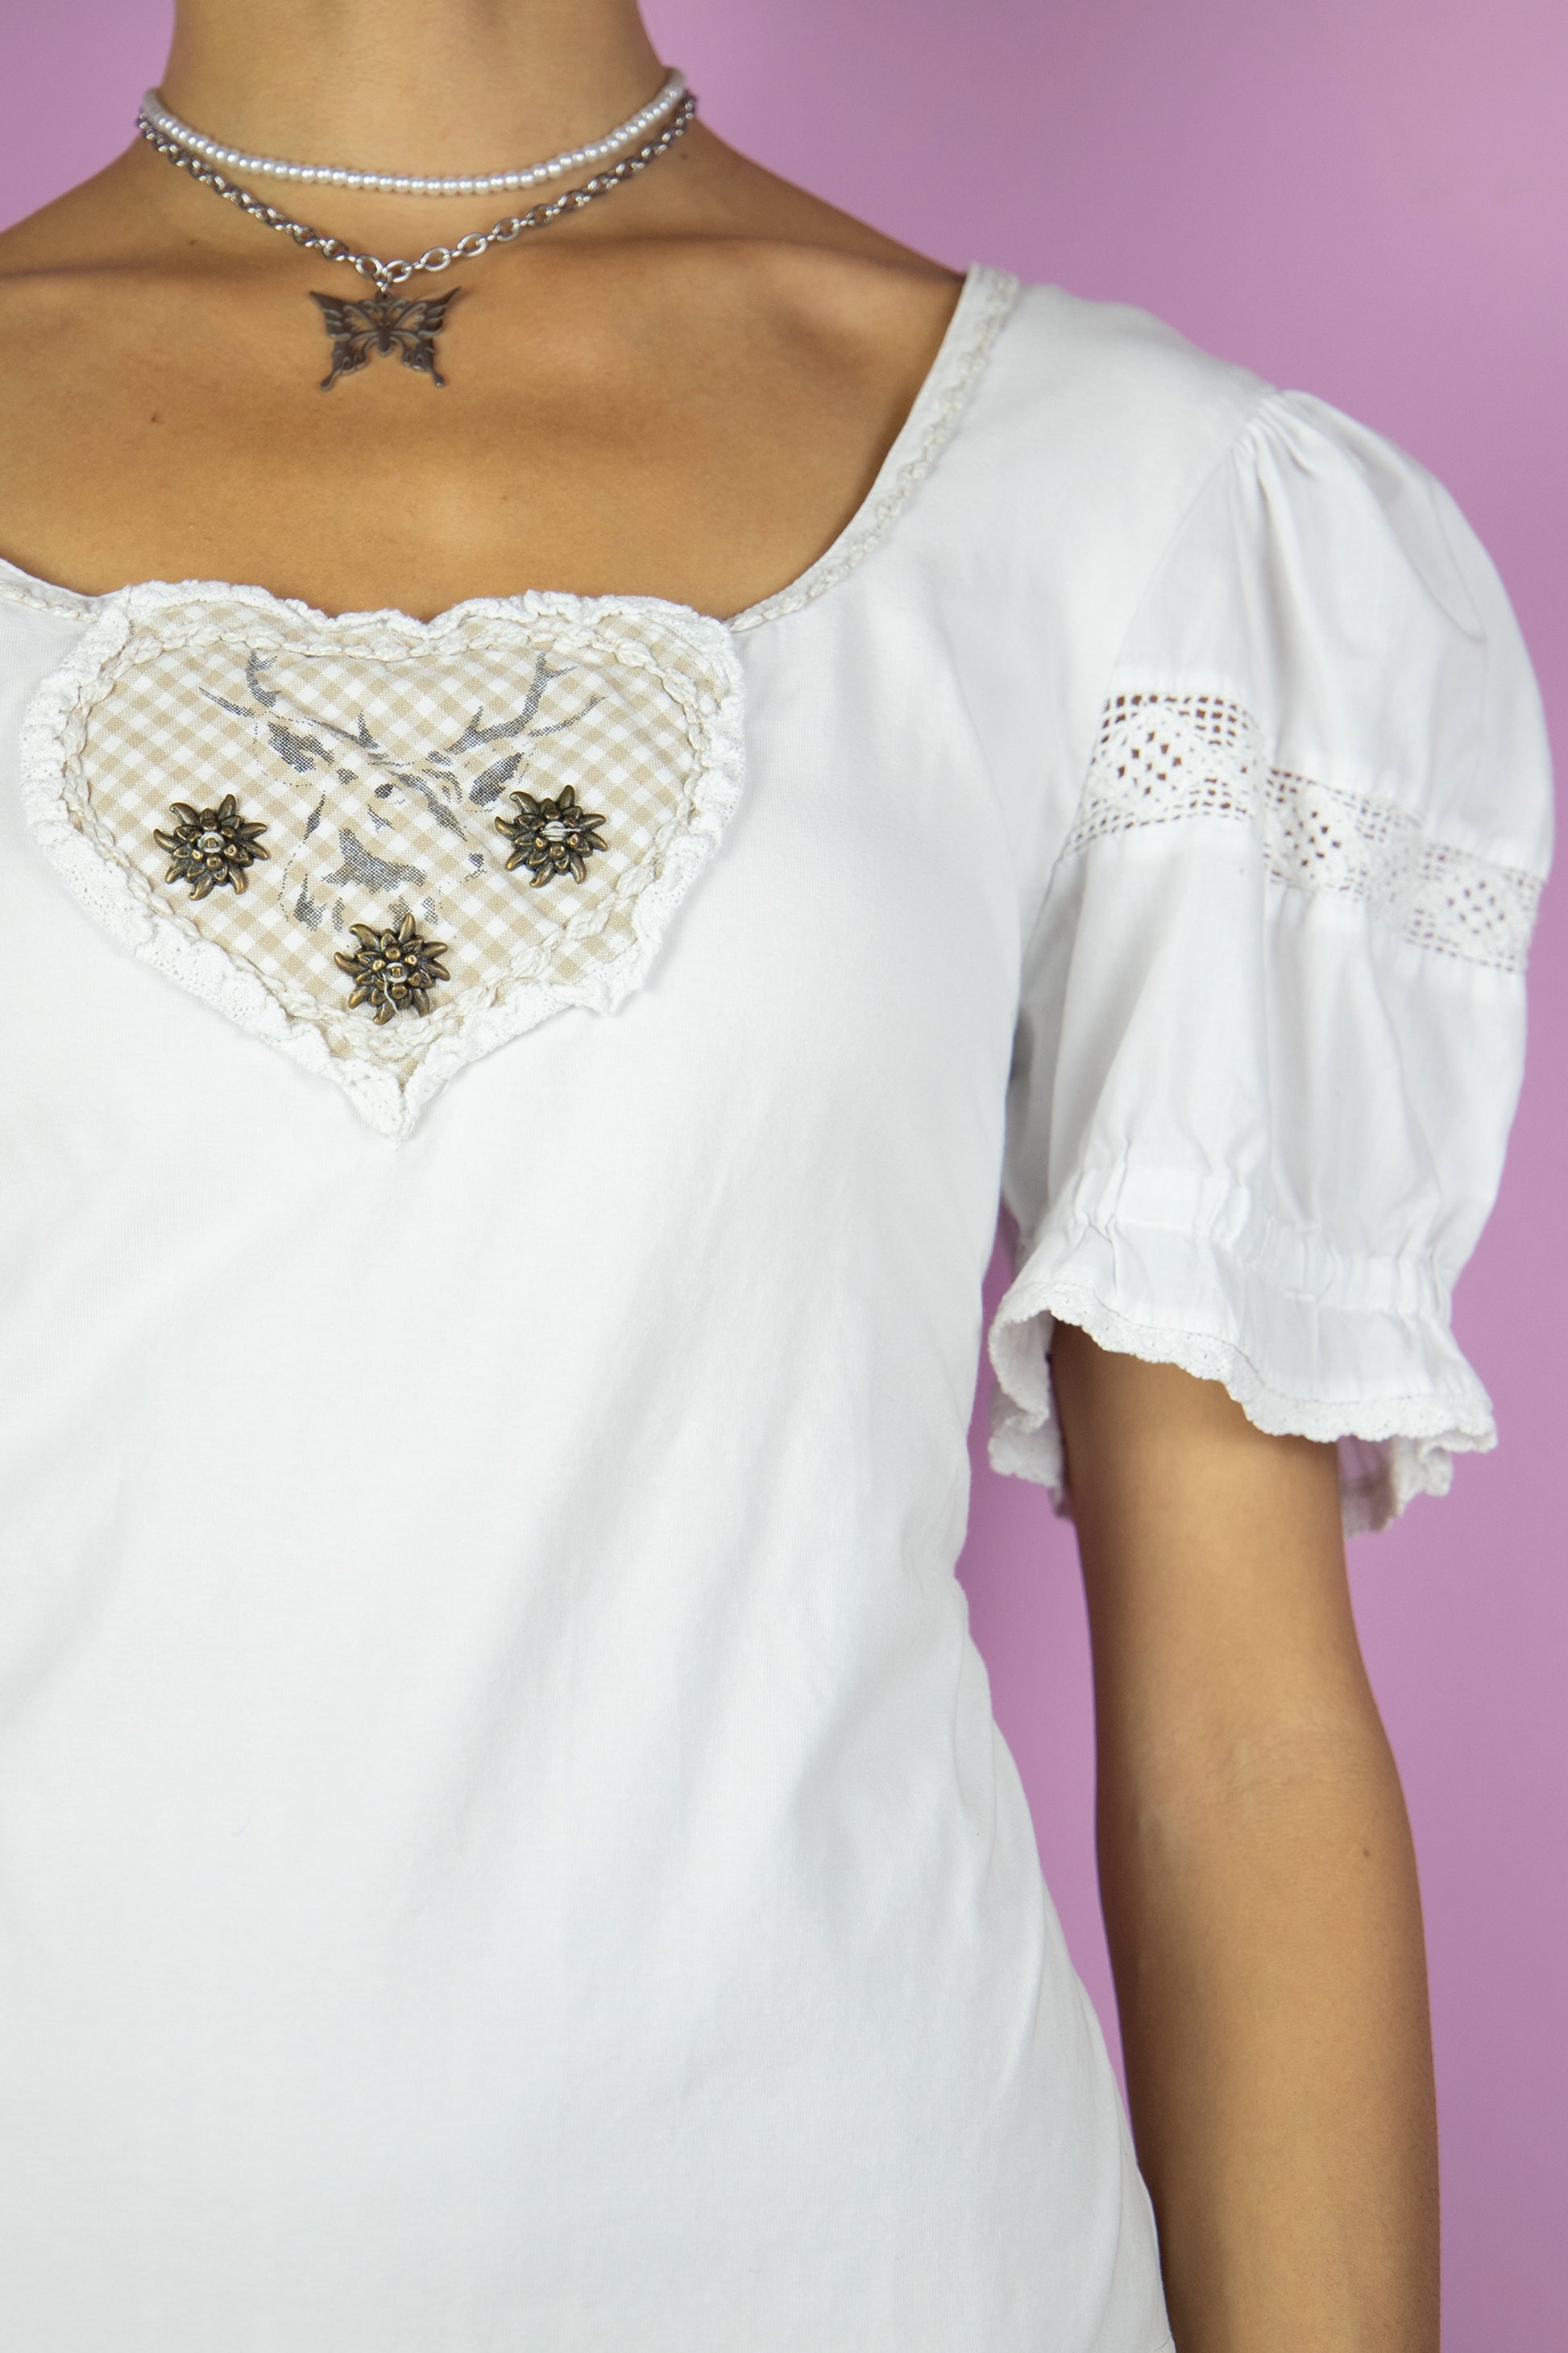 The Vintage 90s White Cottage Milkmaid Top is a short puff sleeve top with crochet details and checkered heart on the front. Country prairie inspired 1990s shirt.